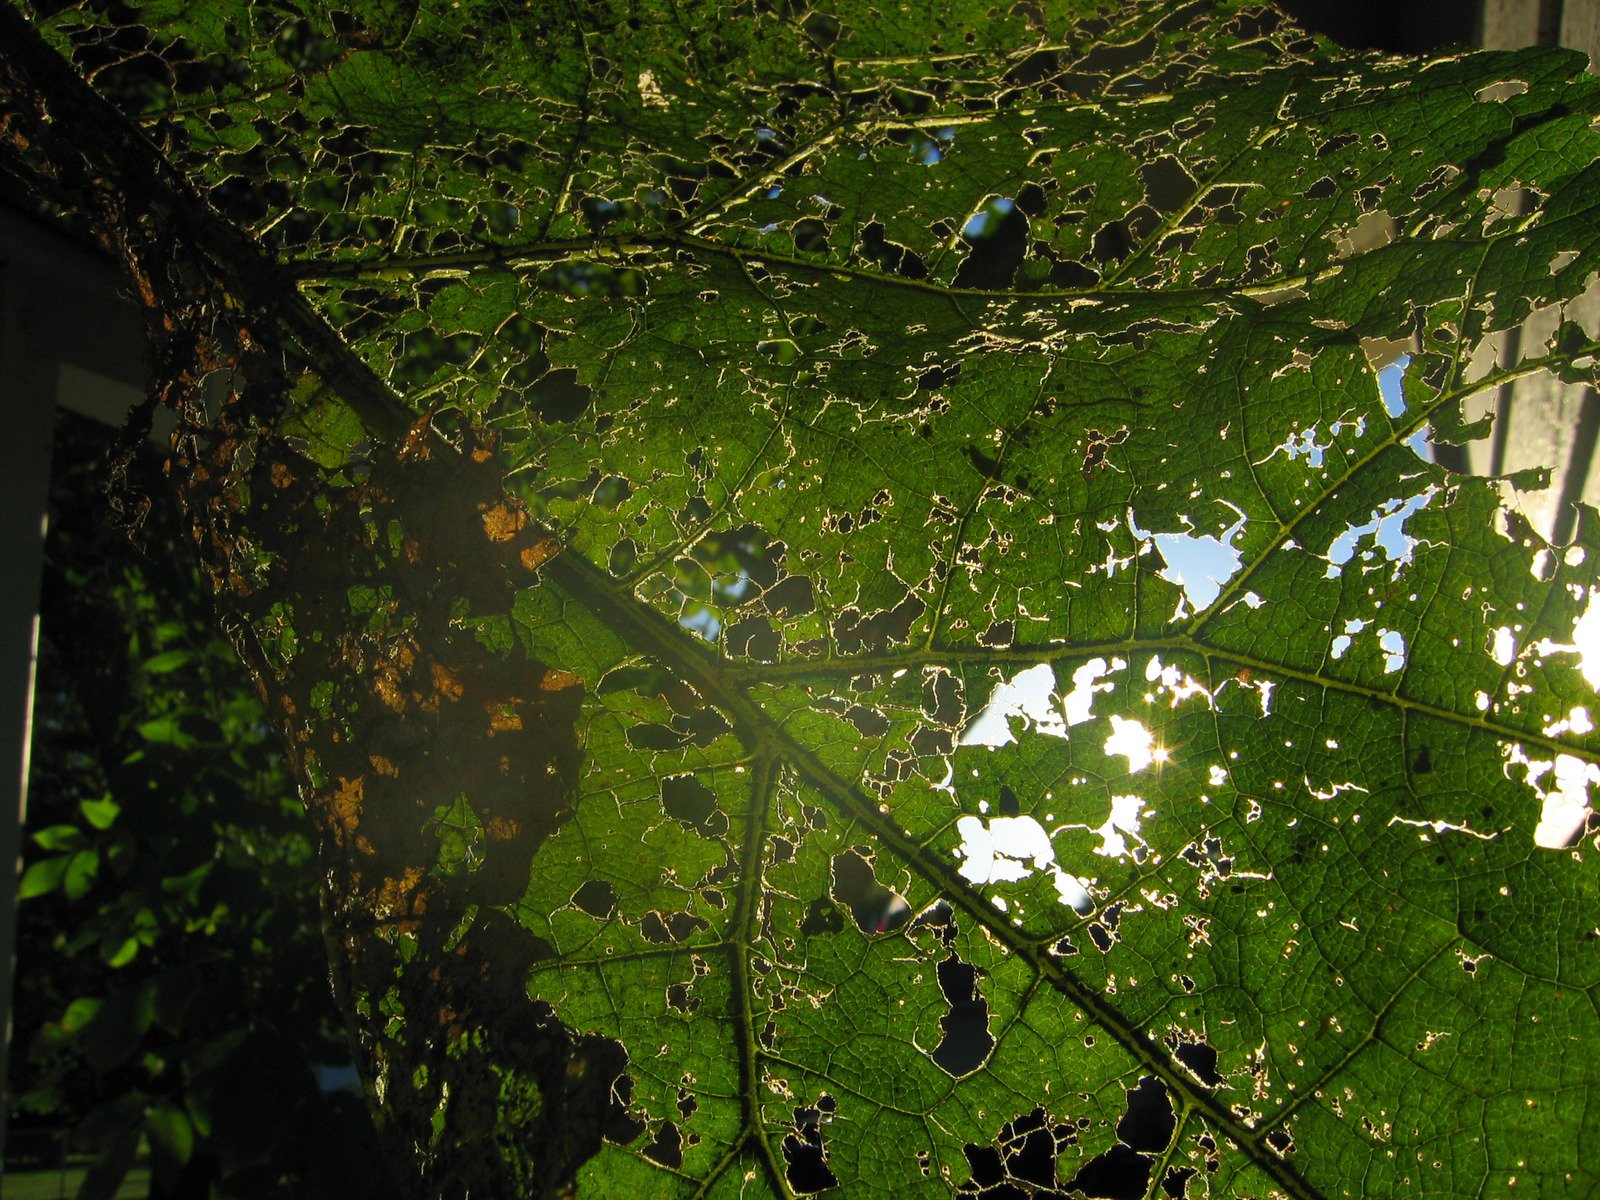 the sun shines brightly through the green leaves